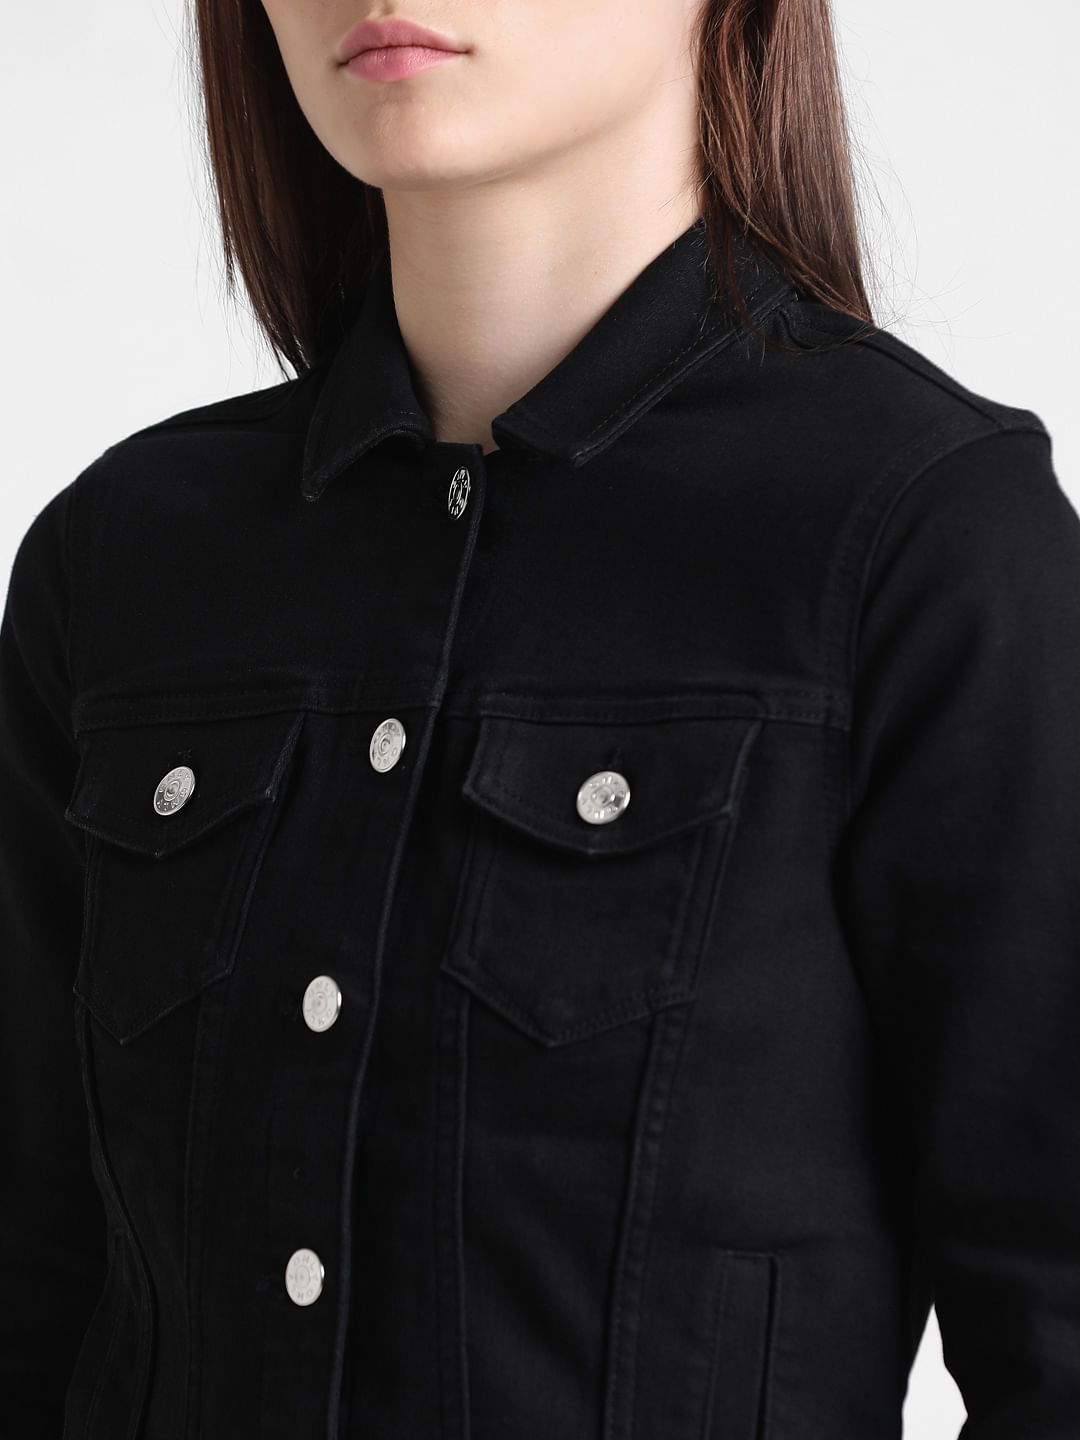 6 Easy Ways To Style Your Black Denim Jackets